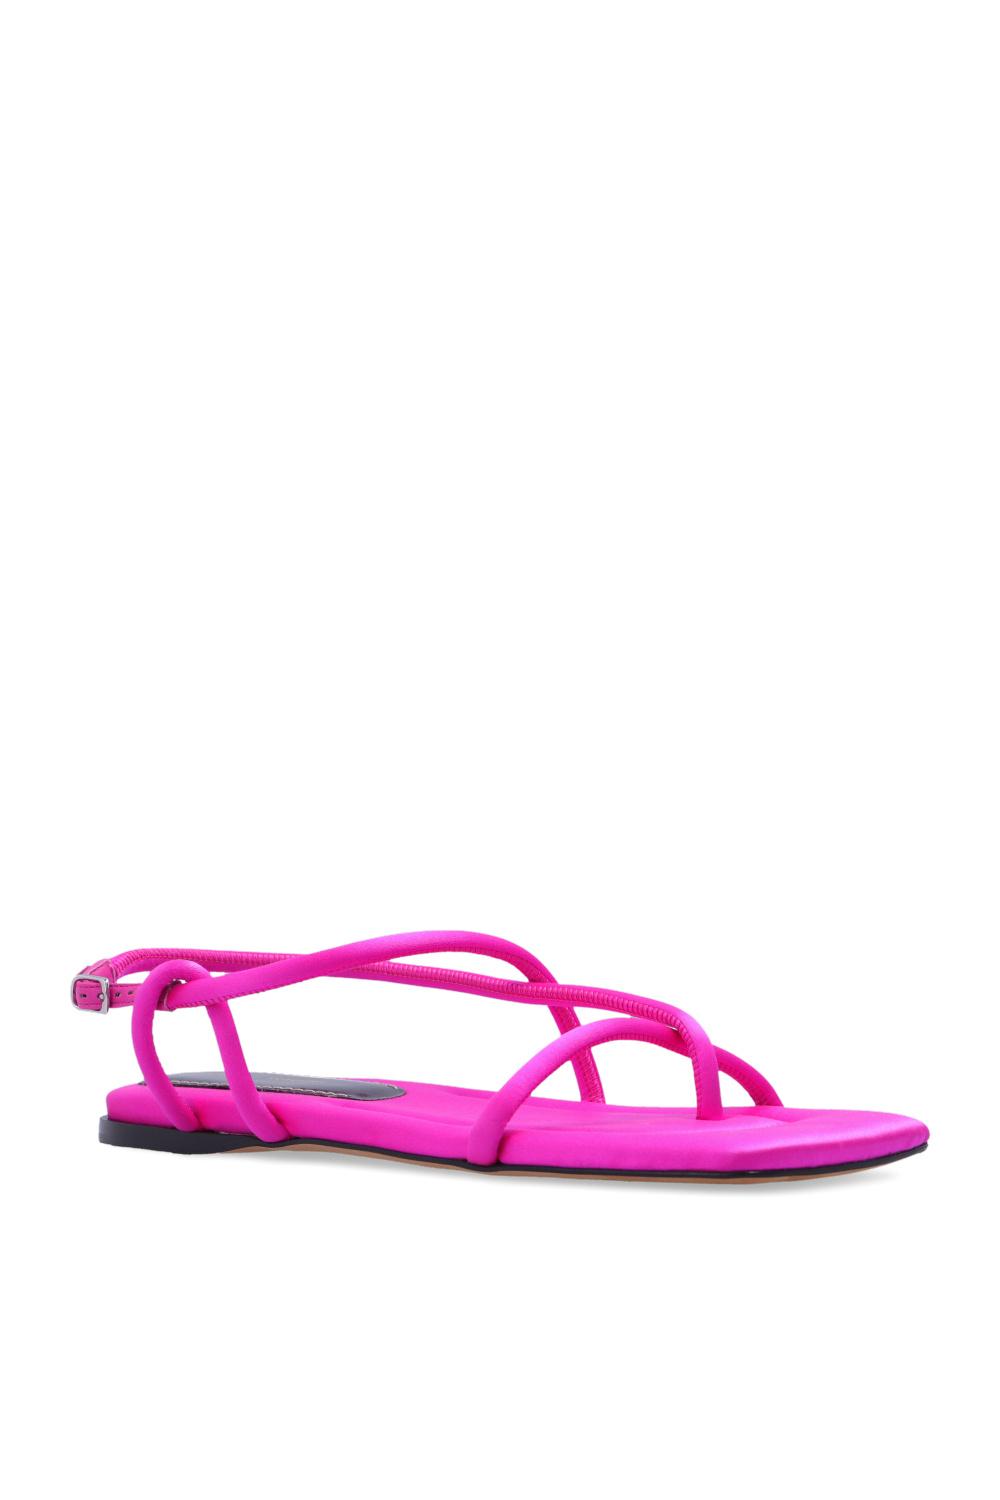 Proenza Schouler 'square Strappy' Sandals in Pink | Lyst